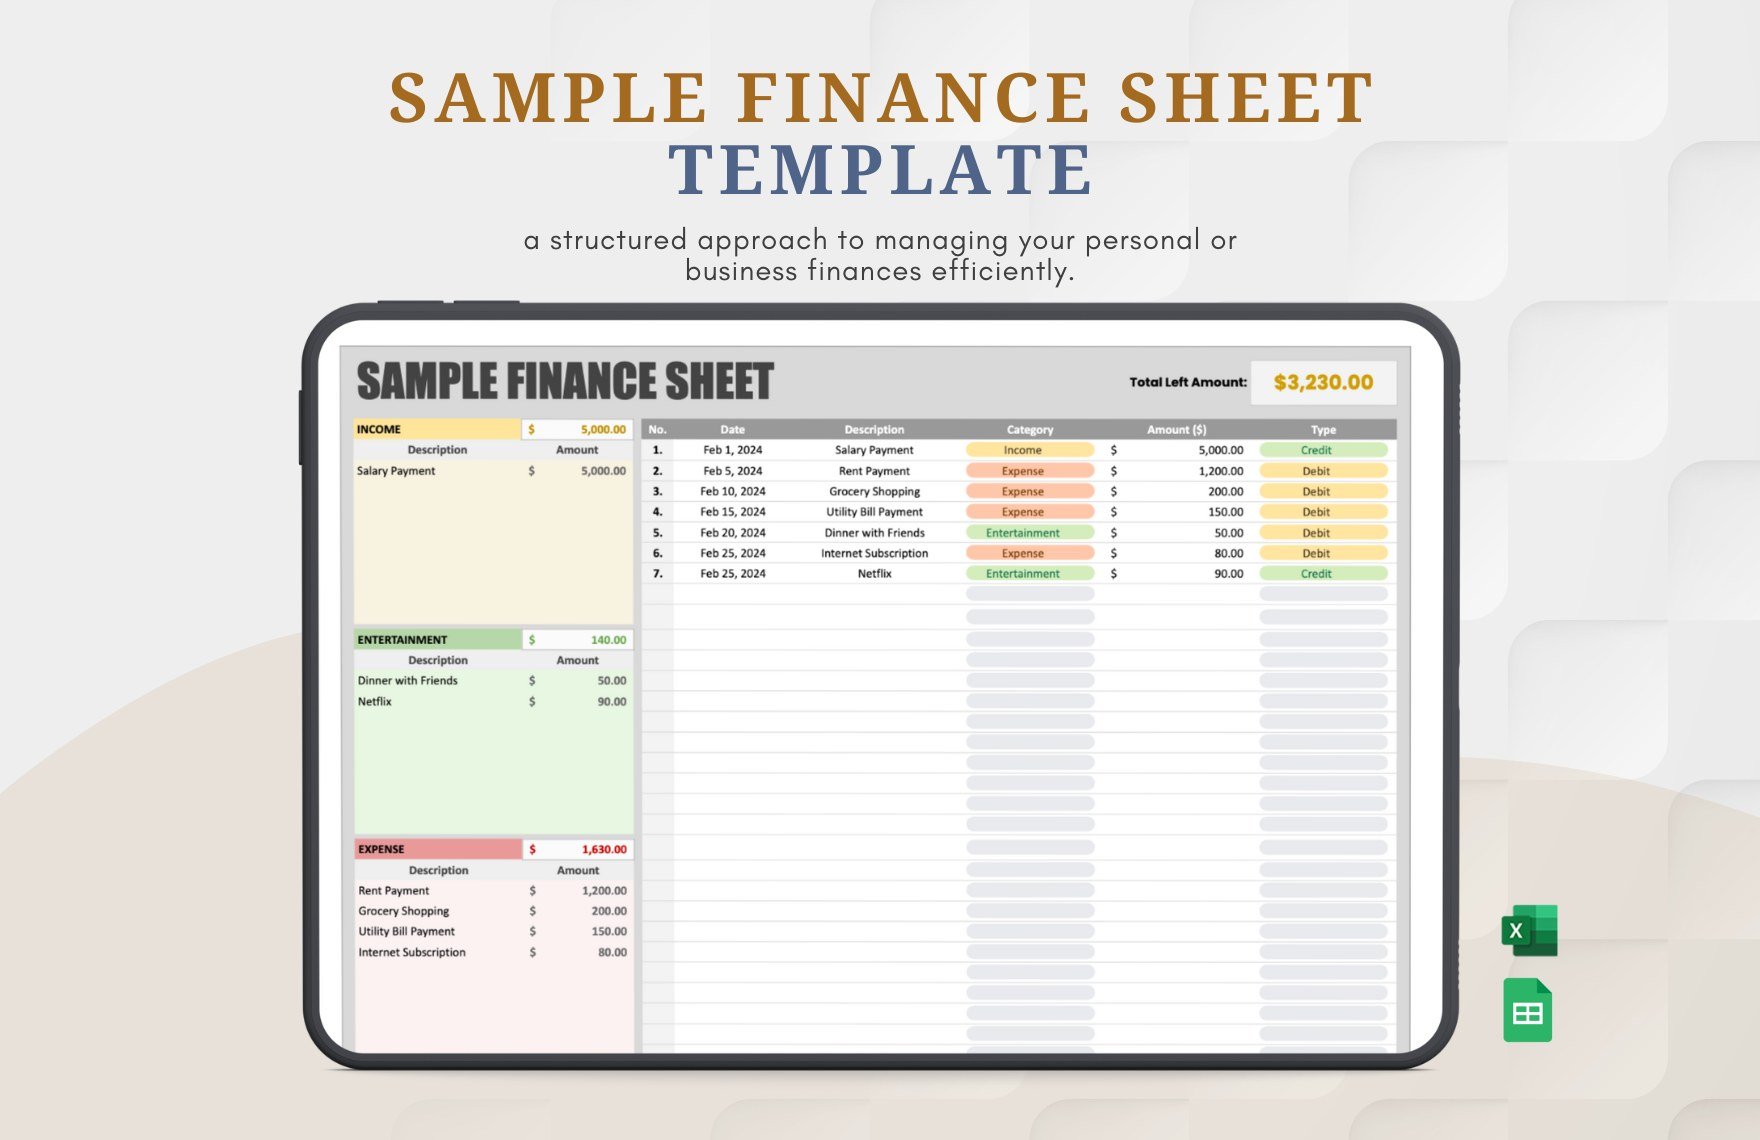 Free Sample Finance Sheet Template in Excel, Google Sheets